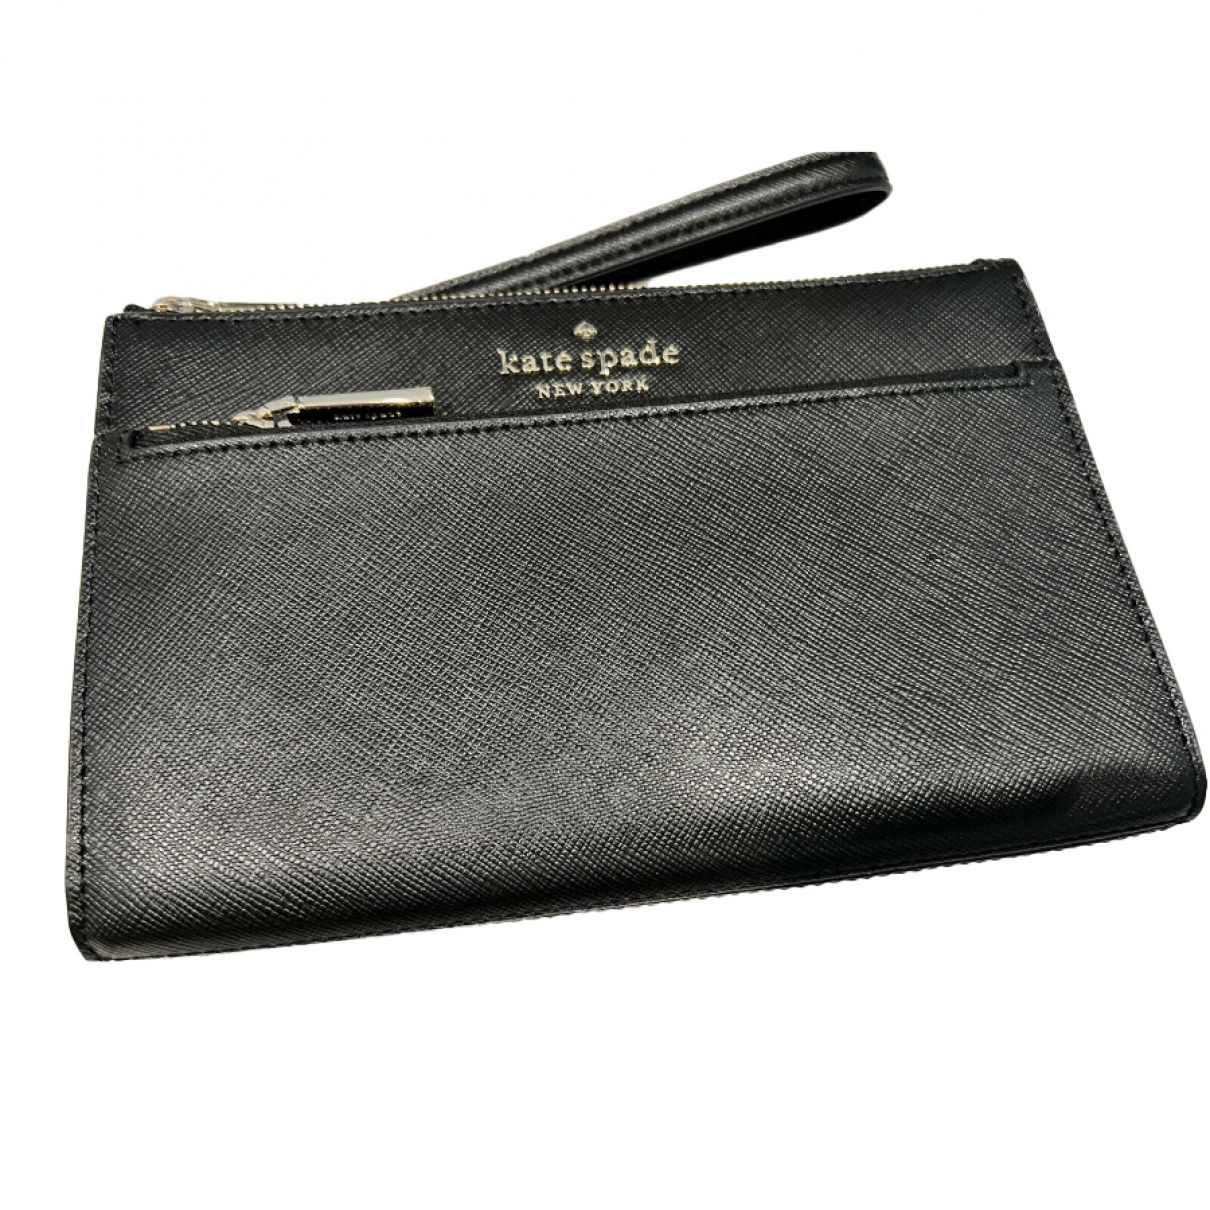 Leather clutch bag Kate Spade Black in Leather - 25355538